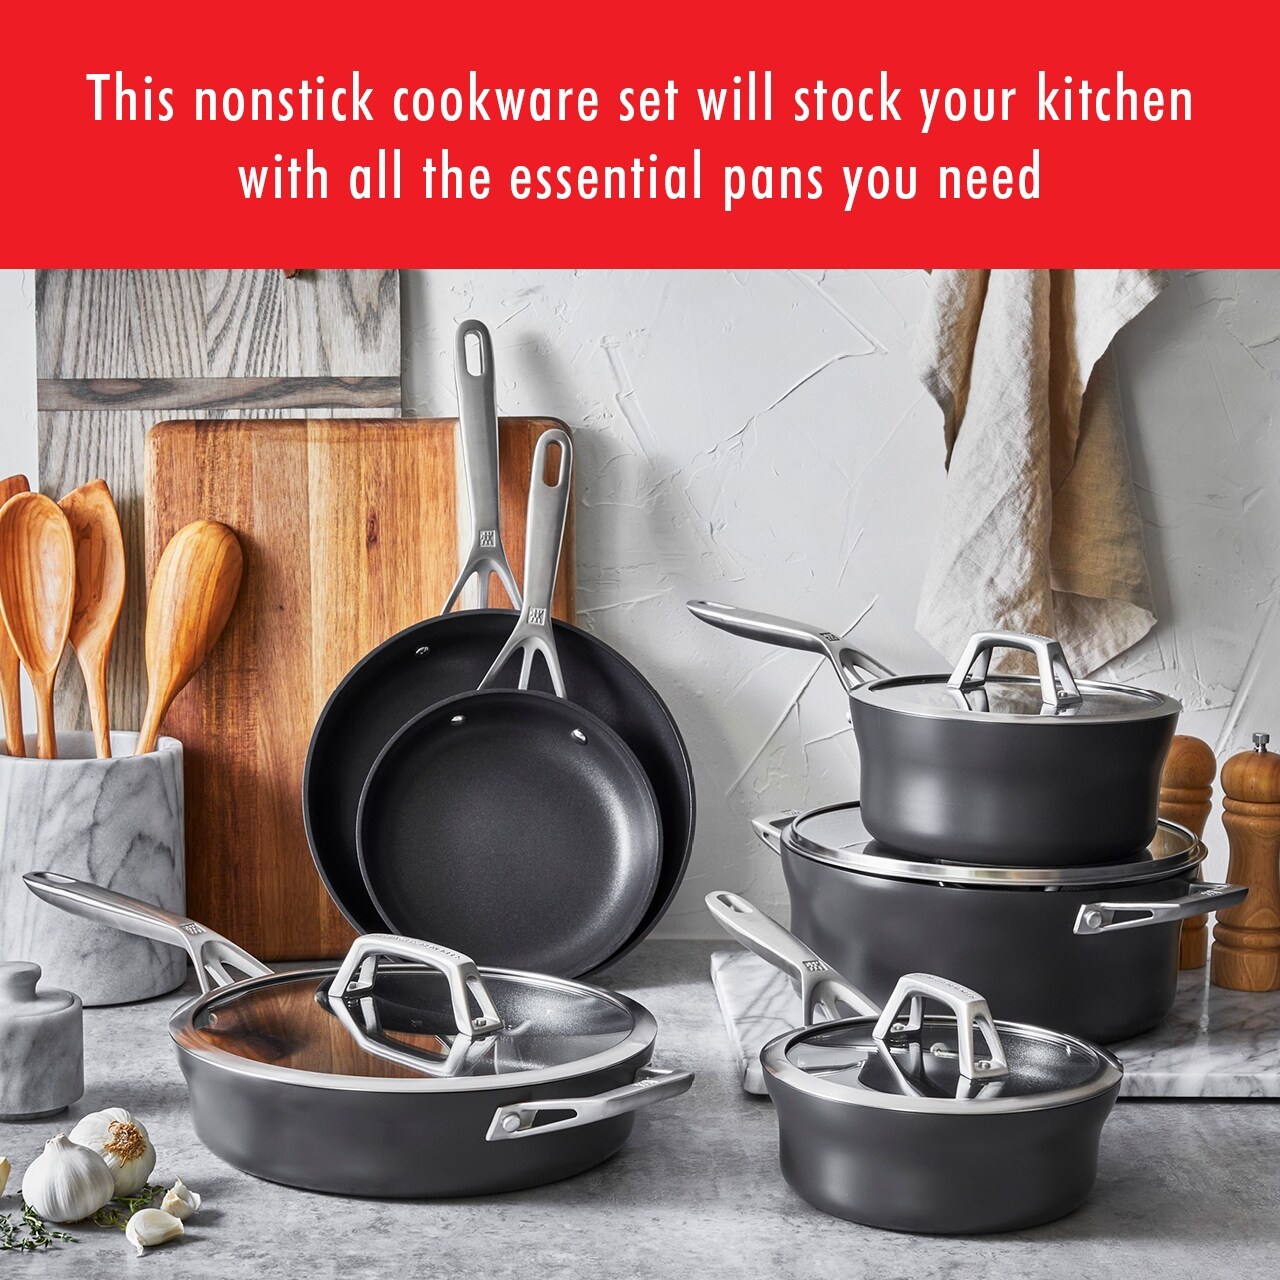 https://ak1.ostkcdn.com/images/products/is/images/direct/1e37a32dbdde5cabfeea6b556ec374a59426a688/ZWILLING-Motion-Nonstick-Hard-Anodized-10-Piece-Cookware-Set-in-Grey%2C-Dutch-Oven%2C-Fry-pan%2C-Saucepan.jpg